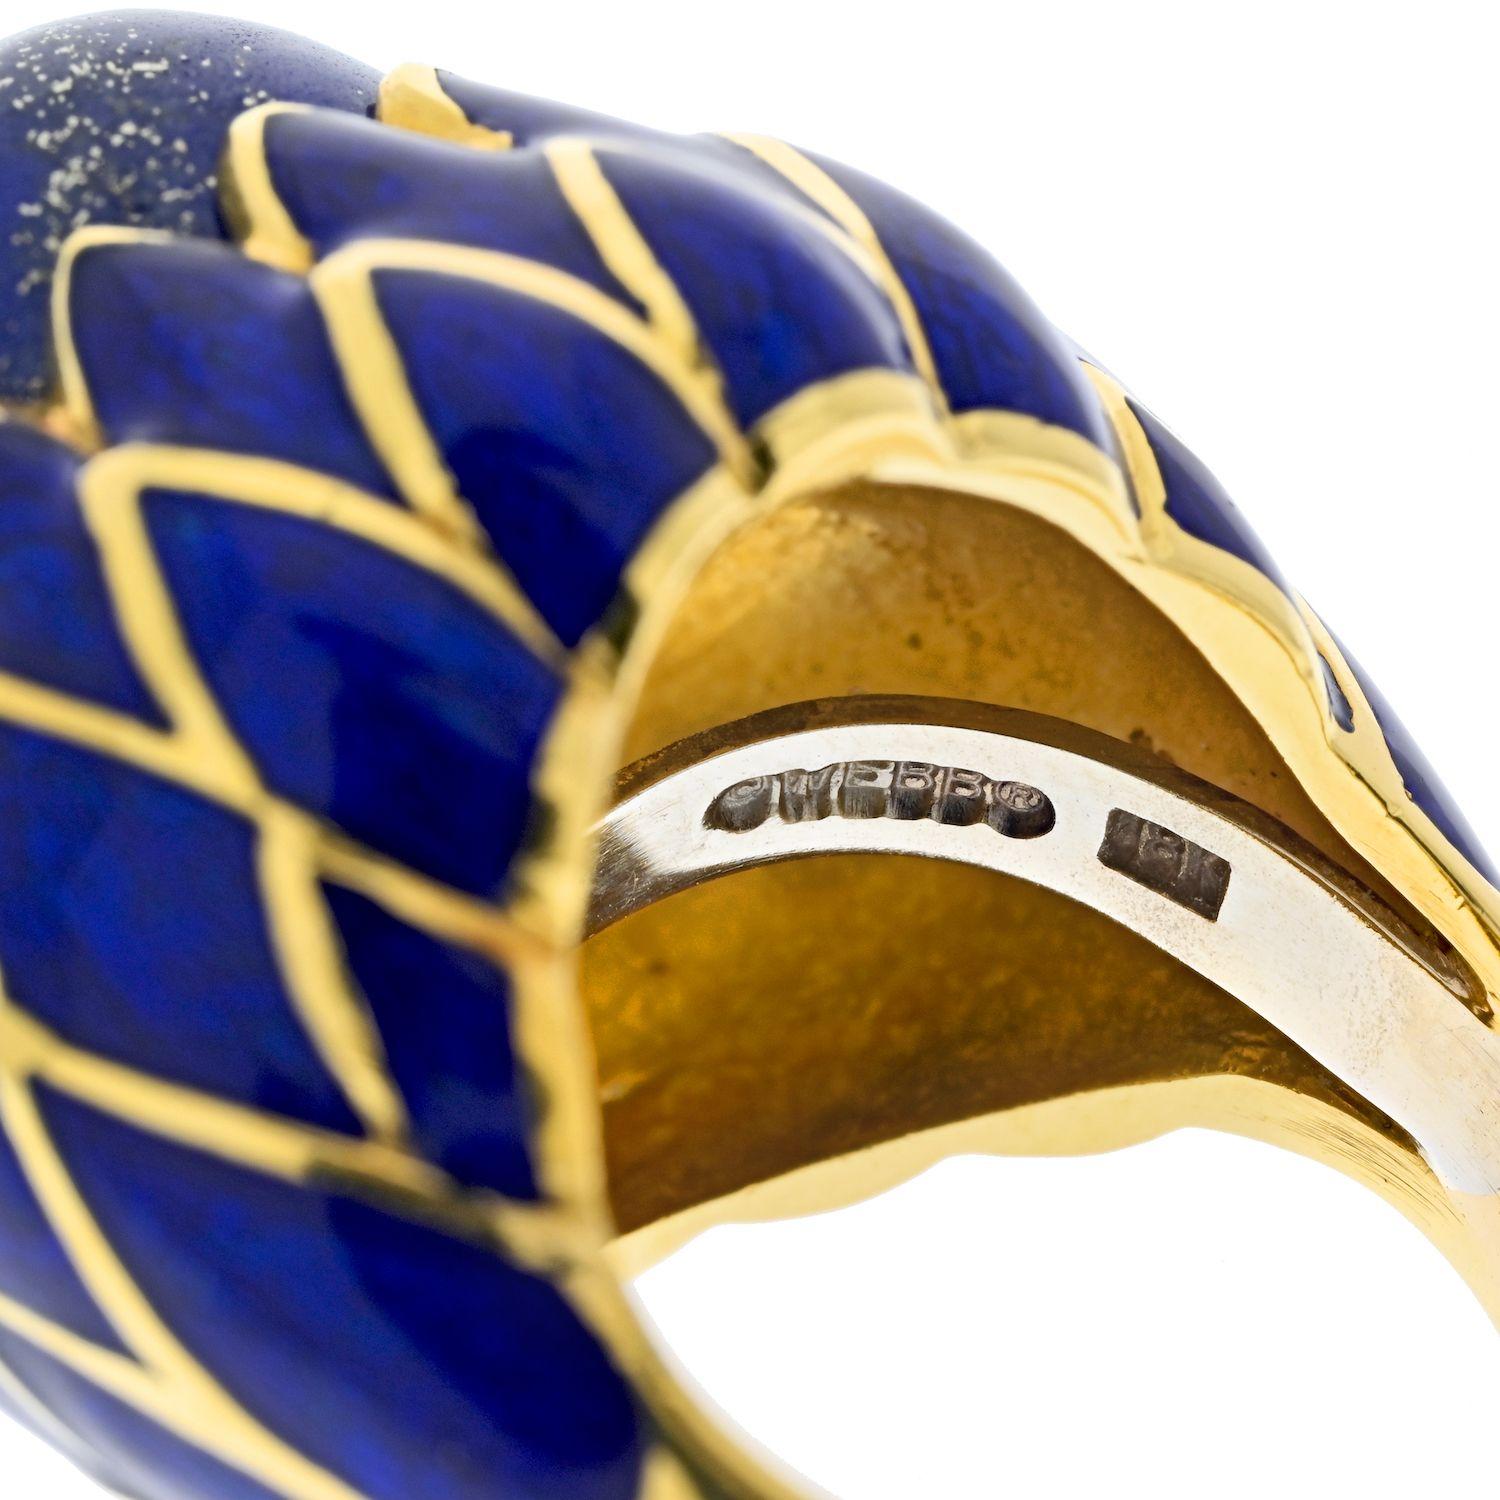 Lapis lazuli has been highly valued for centuries due to its intense blue color and its rarity. It has been used in fine designer jewelry for its stunning appearance and its ability to add a touch of luxury and sophistication to any piece. The deep